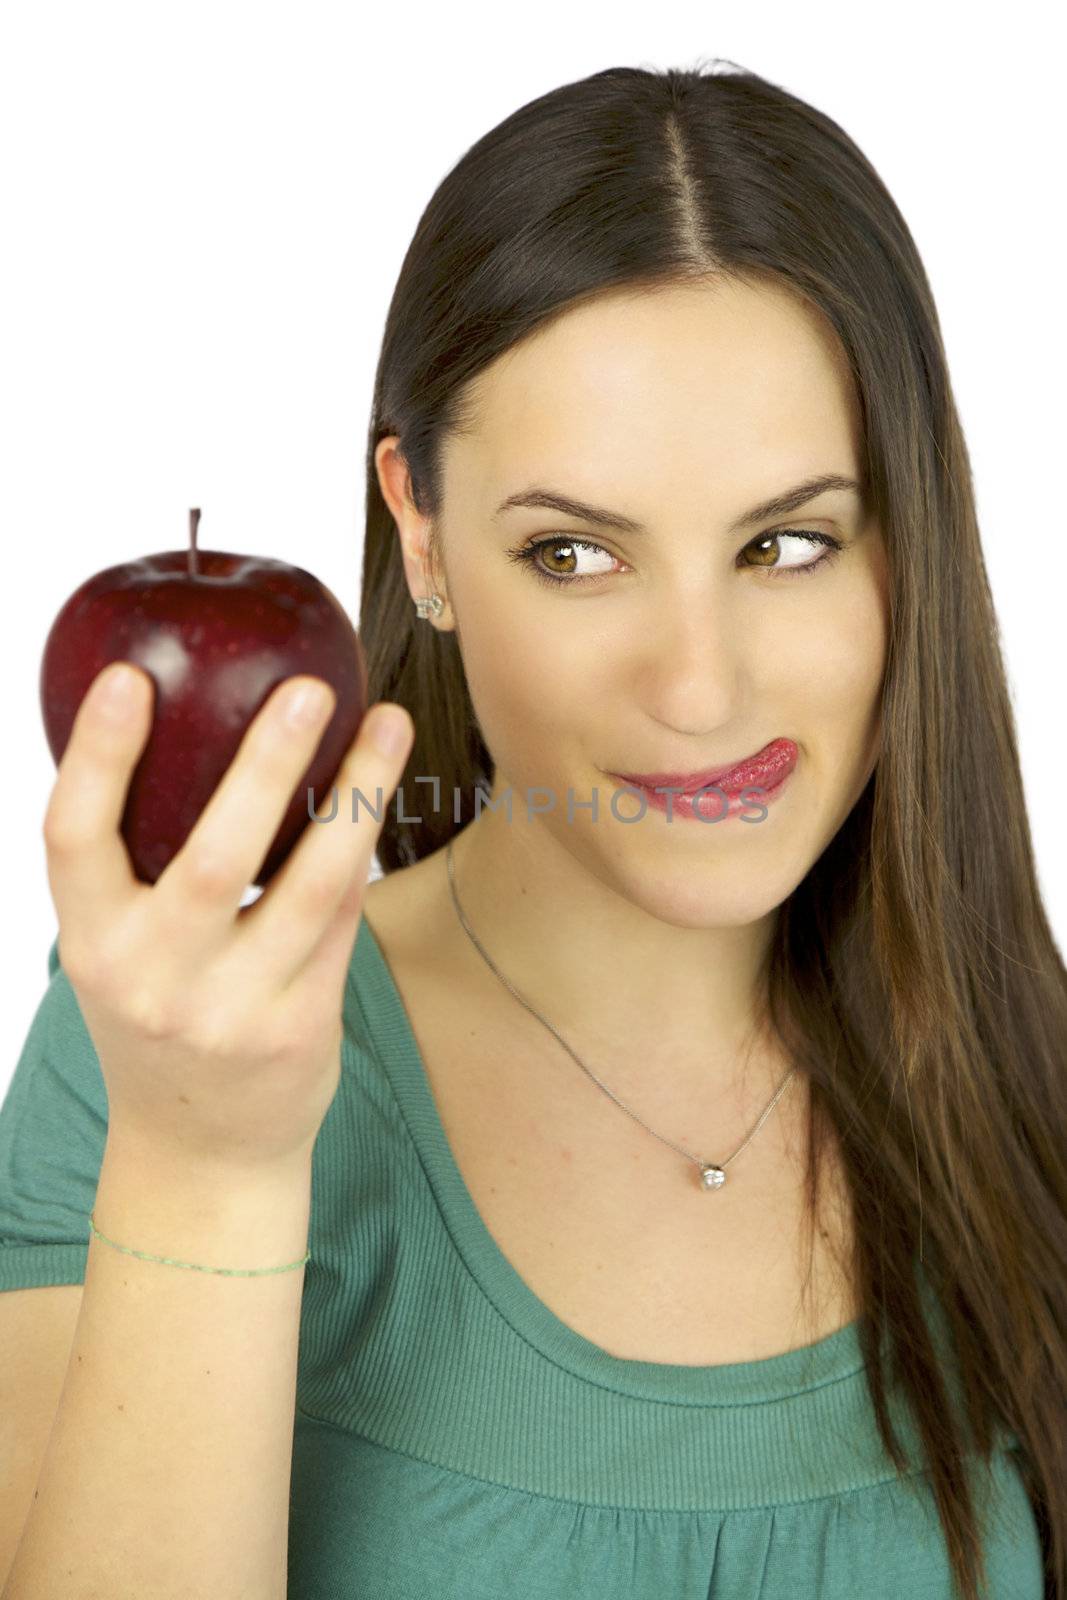 Young female model observing intense a big red apple ready to eat it